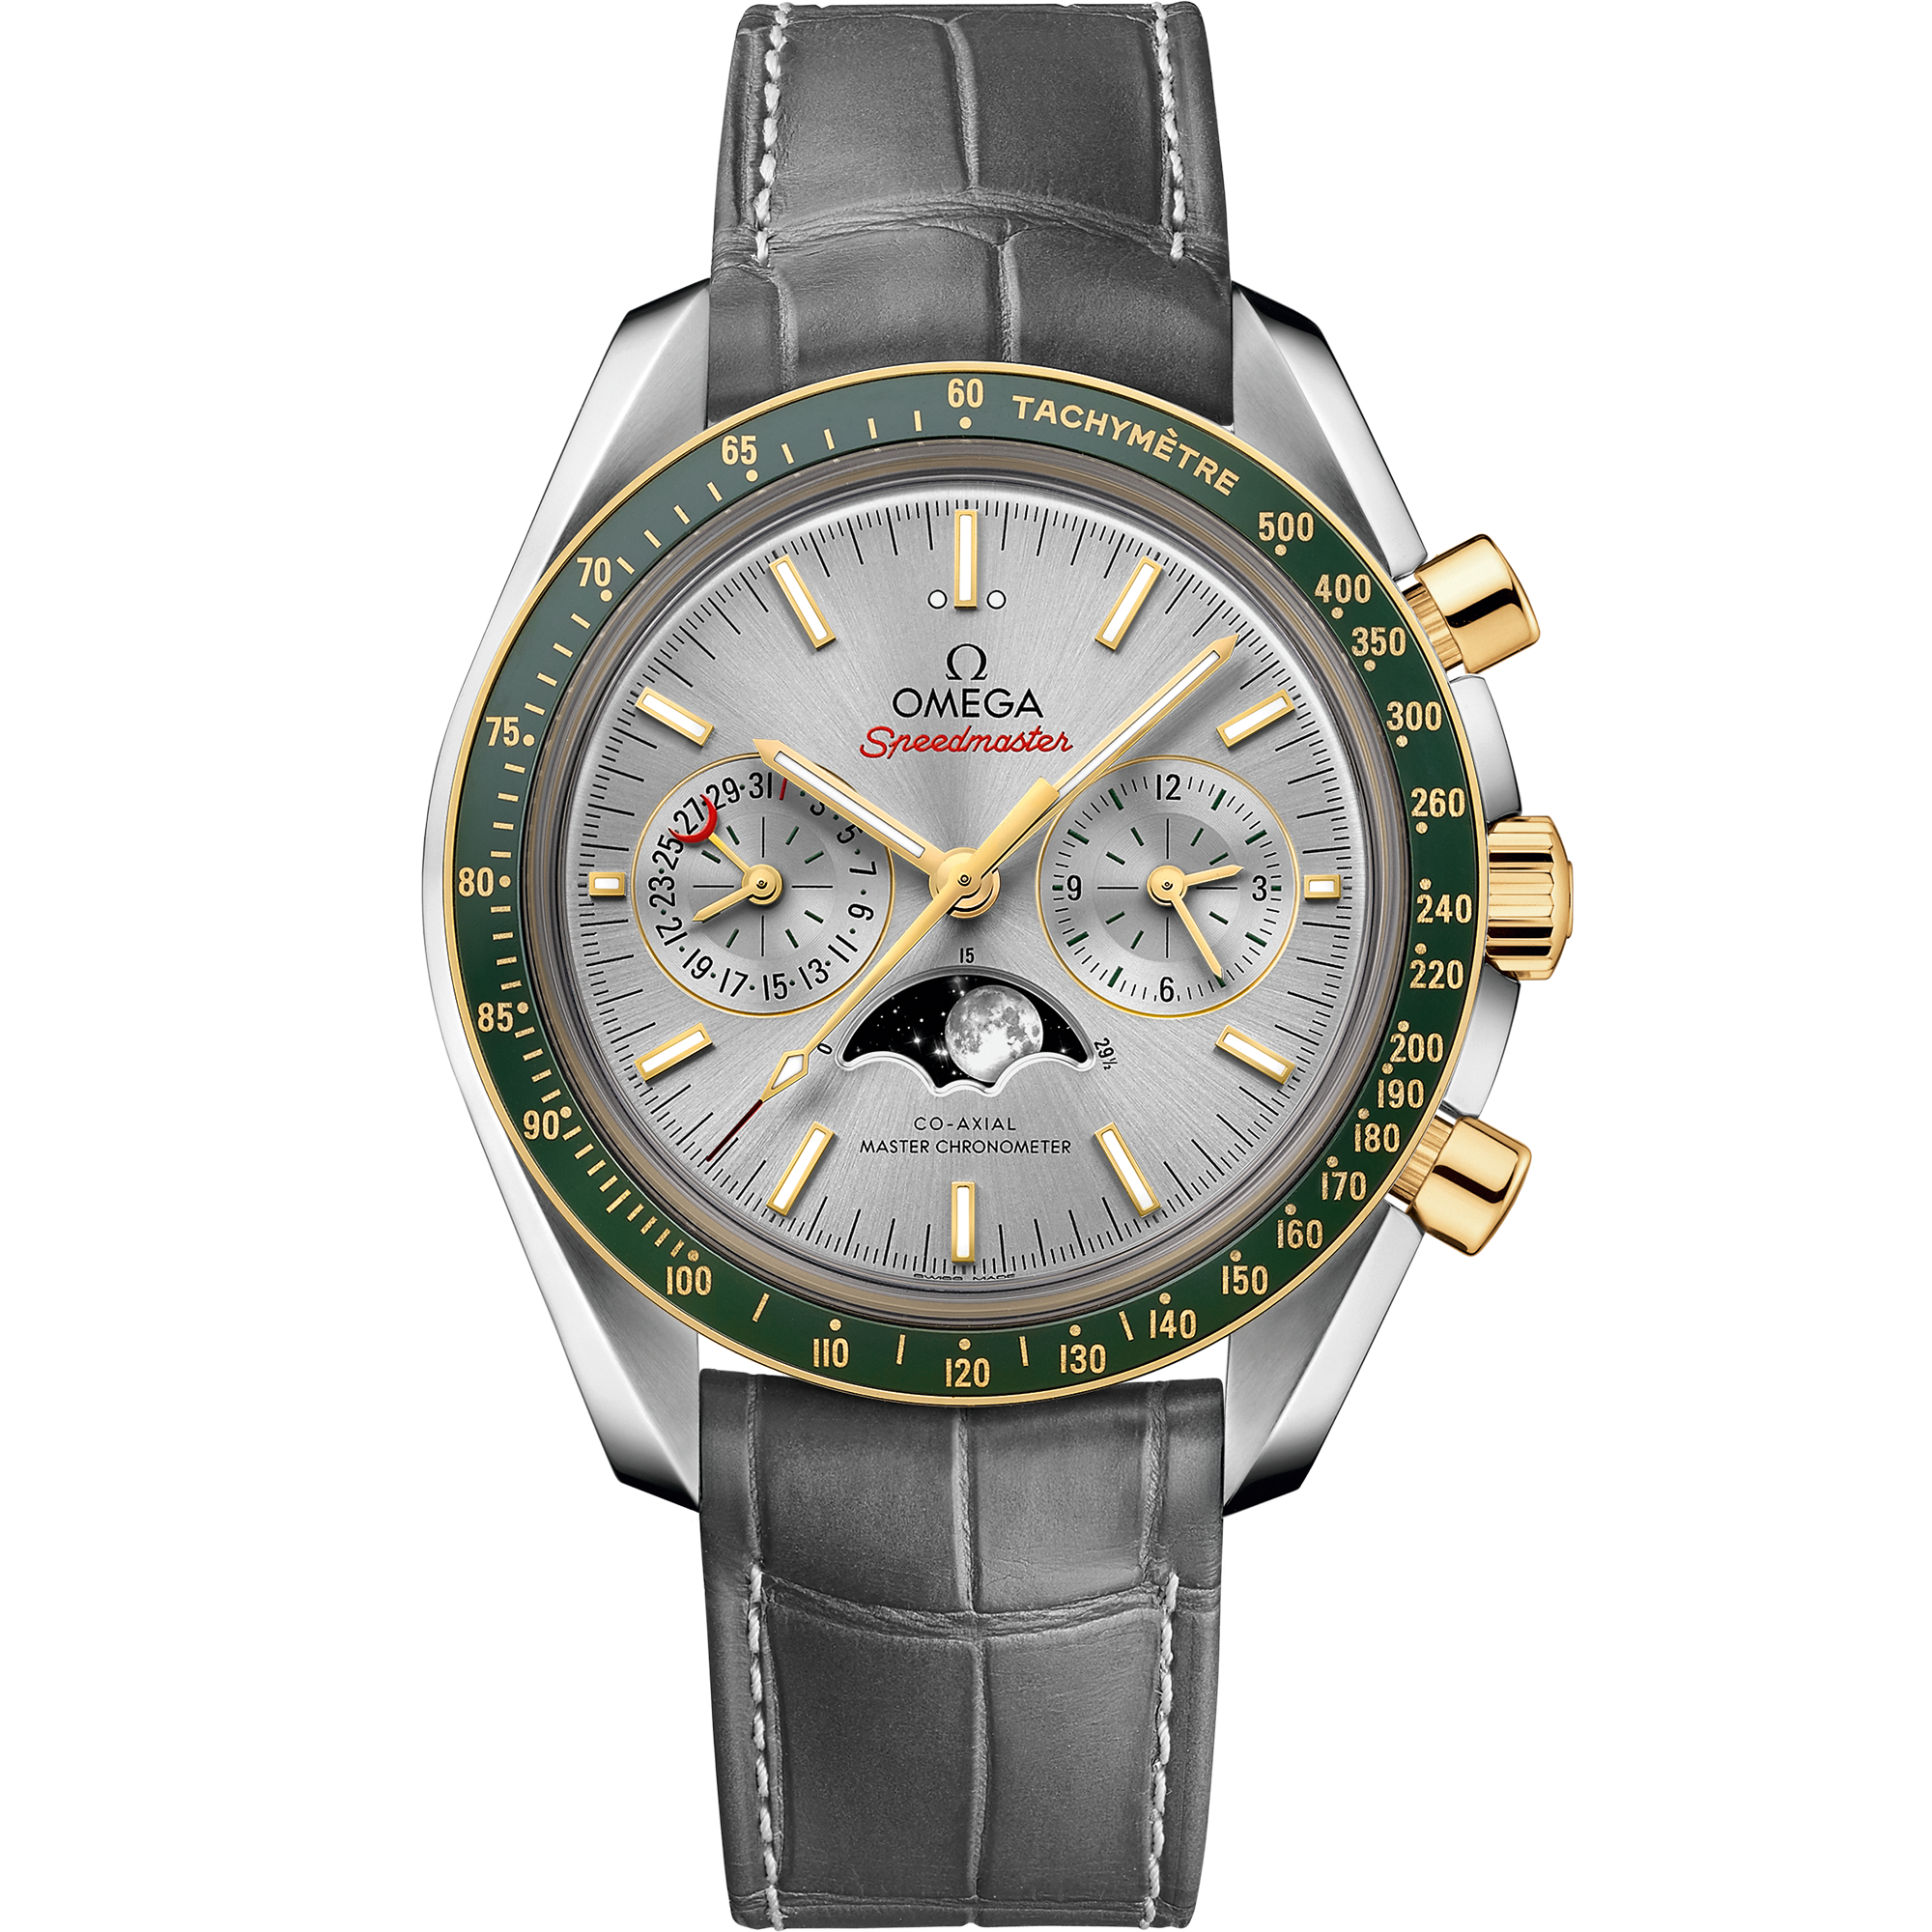 Speedmaster Moonphase 44.25 mm, steel - yellow gold on leather strap - 304.23.44.52.06.001